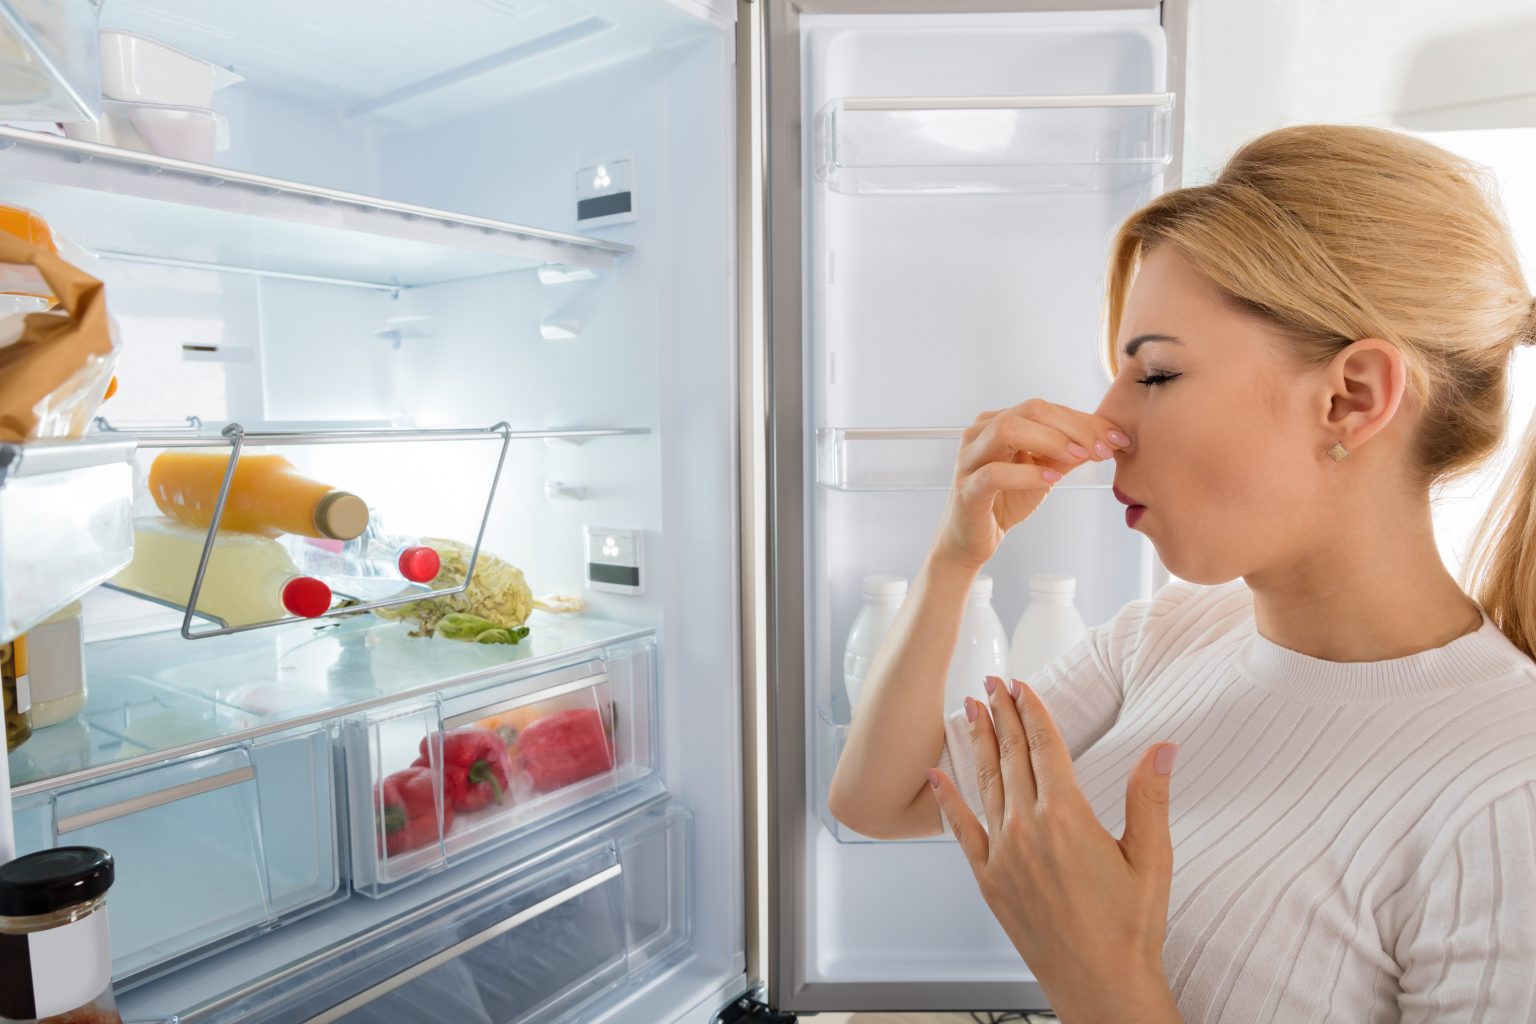 a woman opened refrigerator door and she put a hand on her nose because of the bad odor from refrigerator.